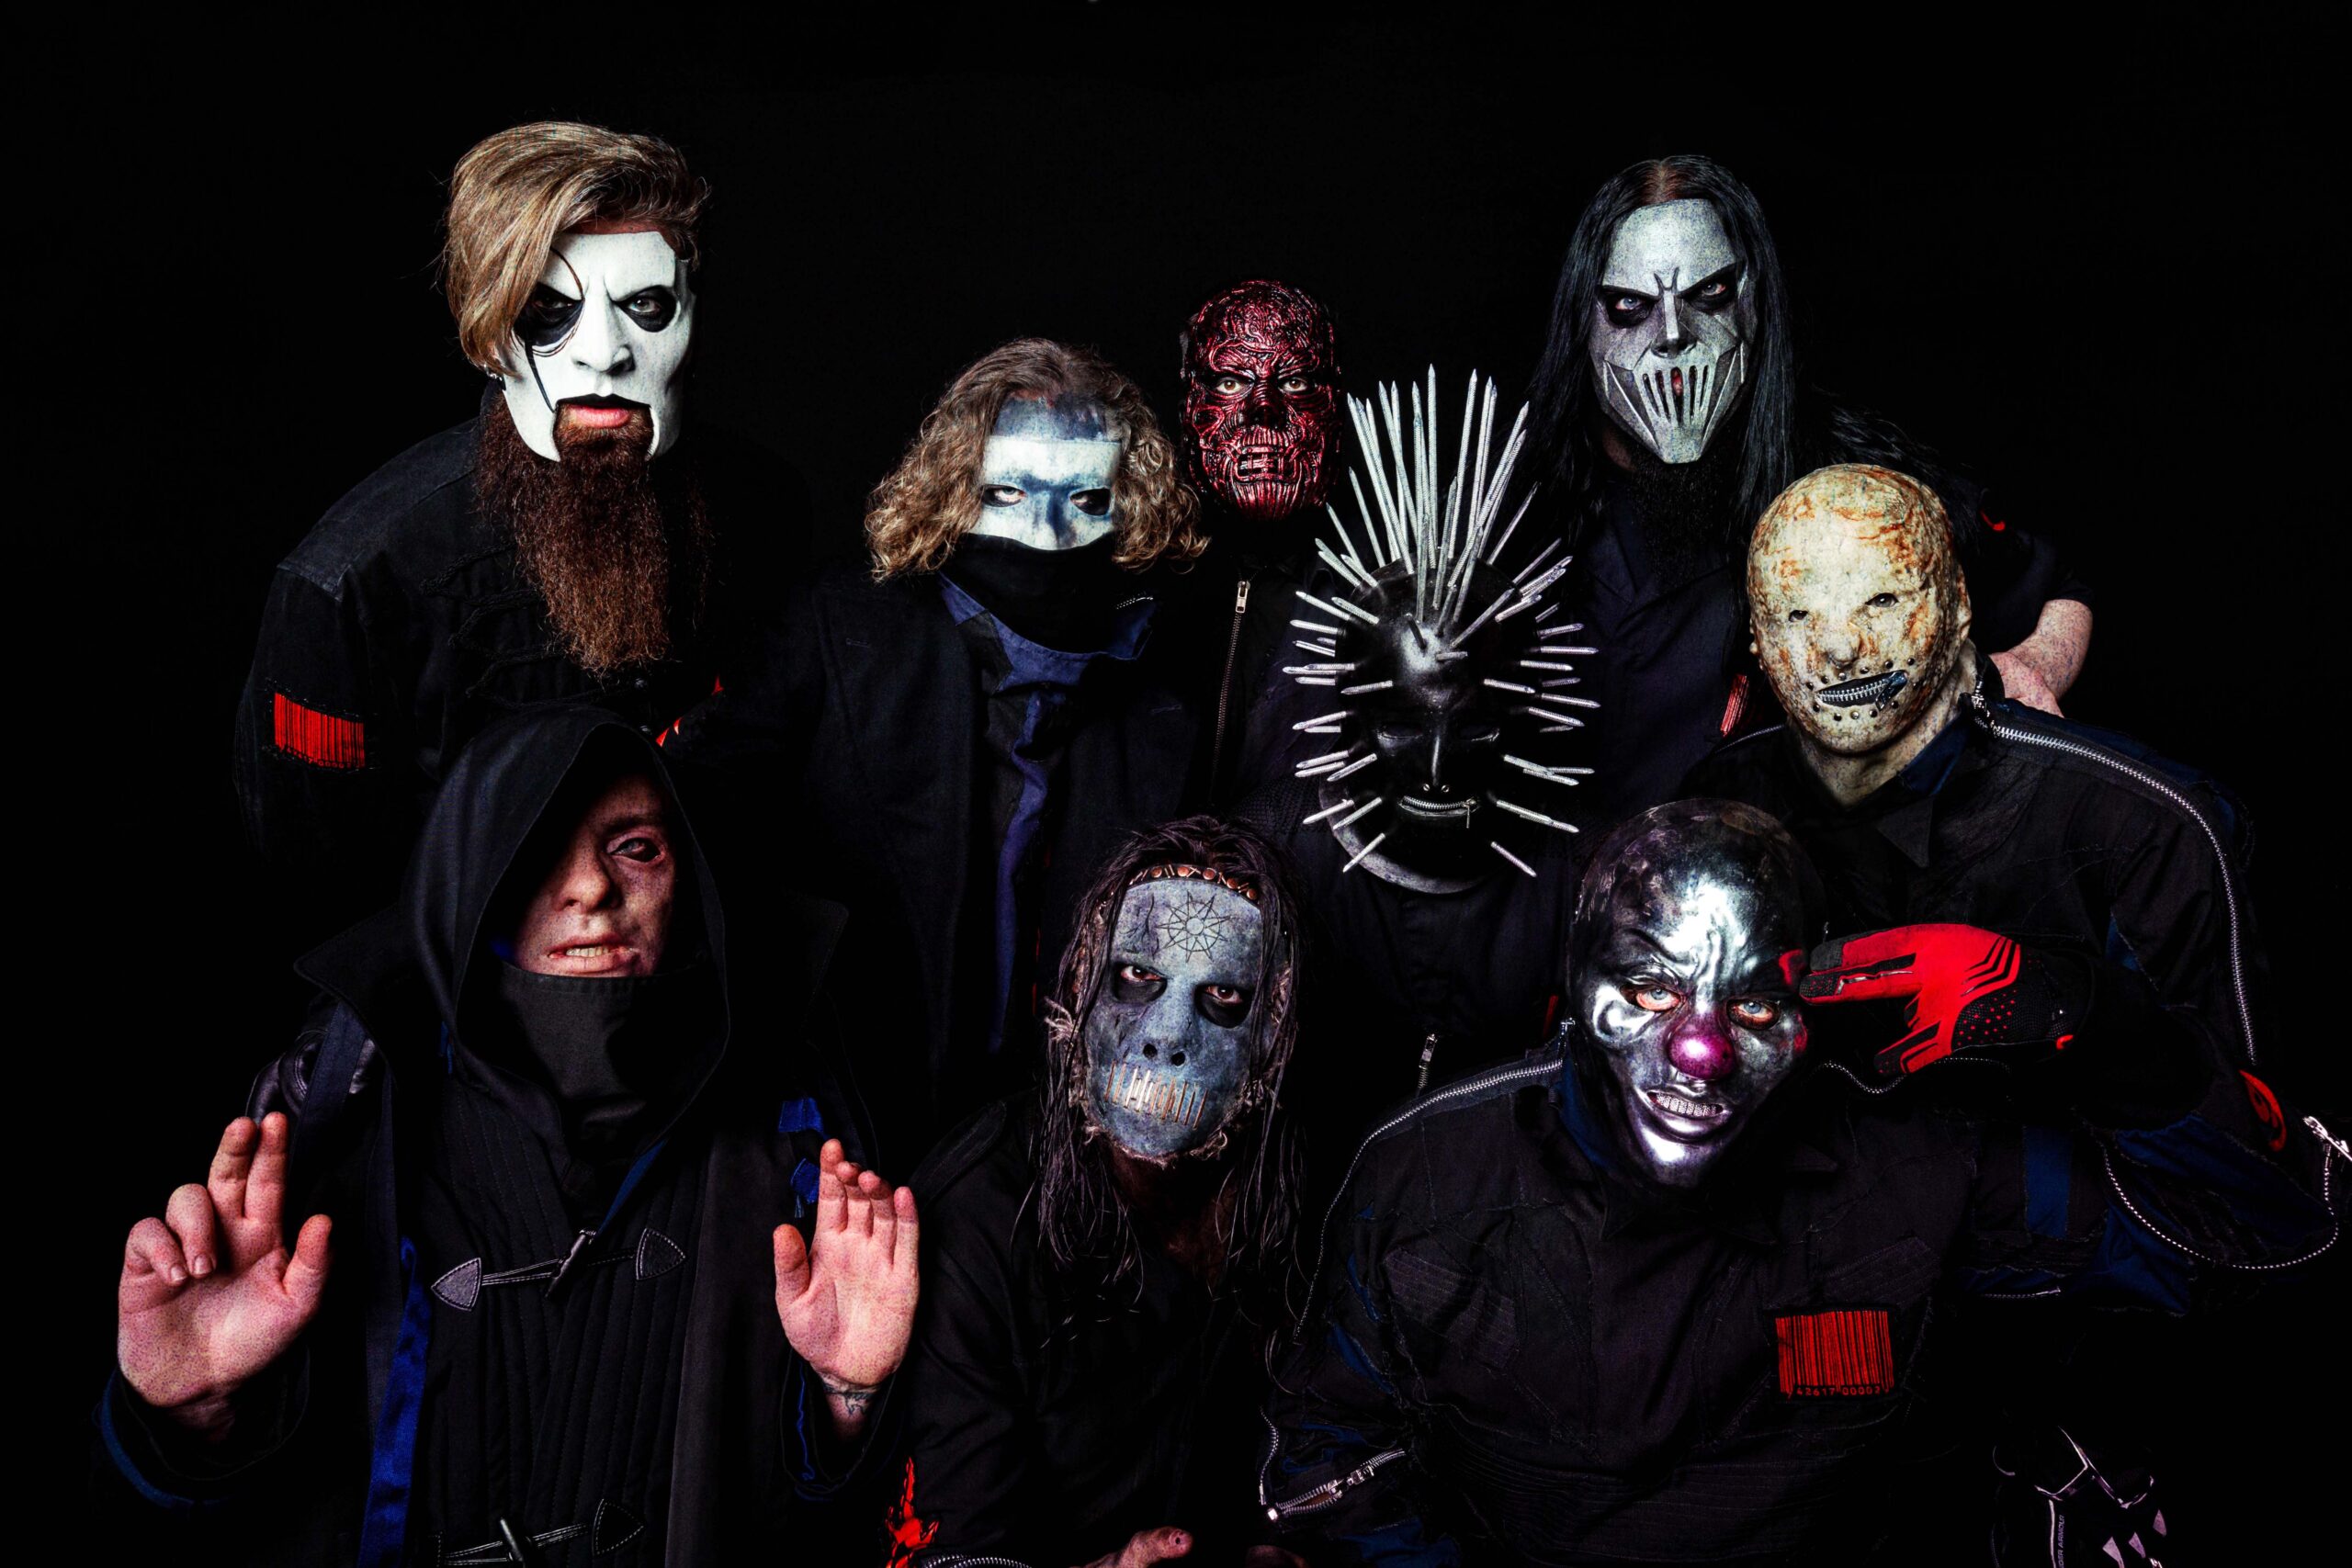 SLIPKNOT ANNOUNCE NEW ALBUM ‘WE ARE NOT YOUR KIND’ OUT AUGUST 9 | WATCH VIDEO FOR ‘UNSAINTED’ NOW